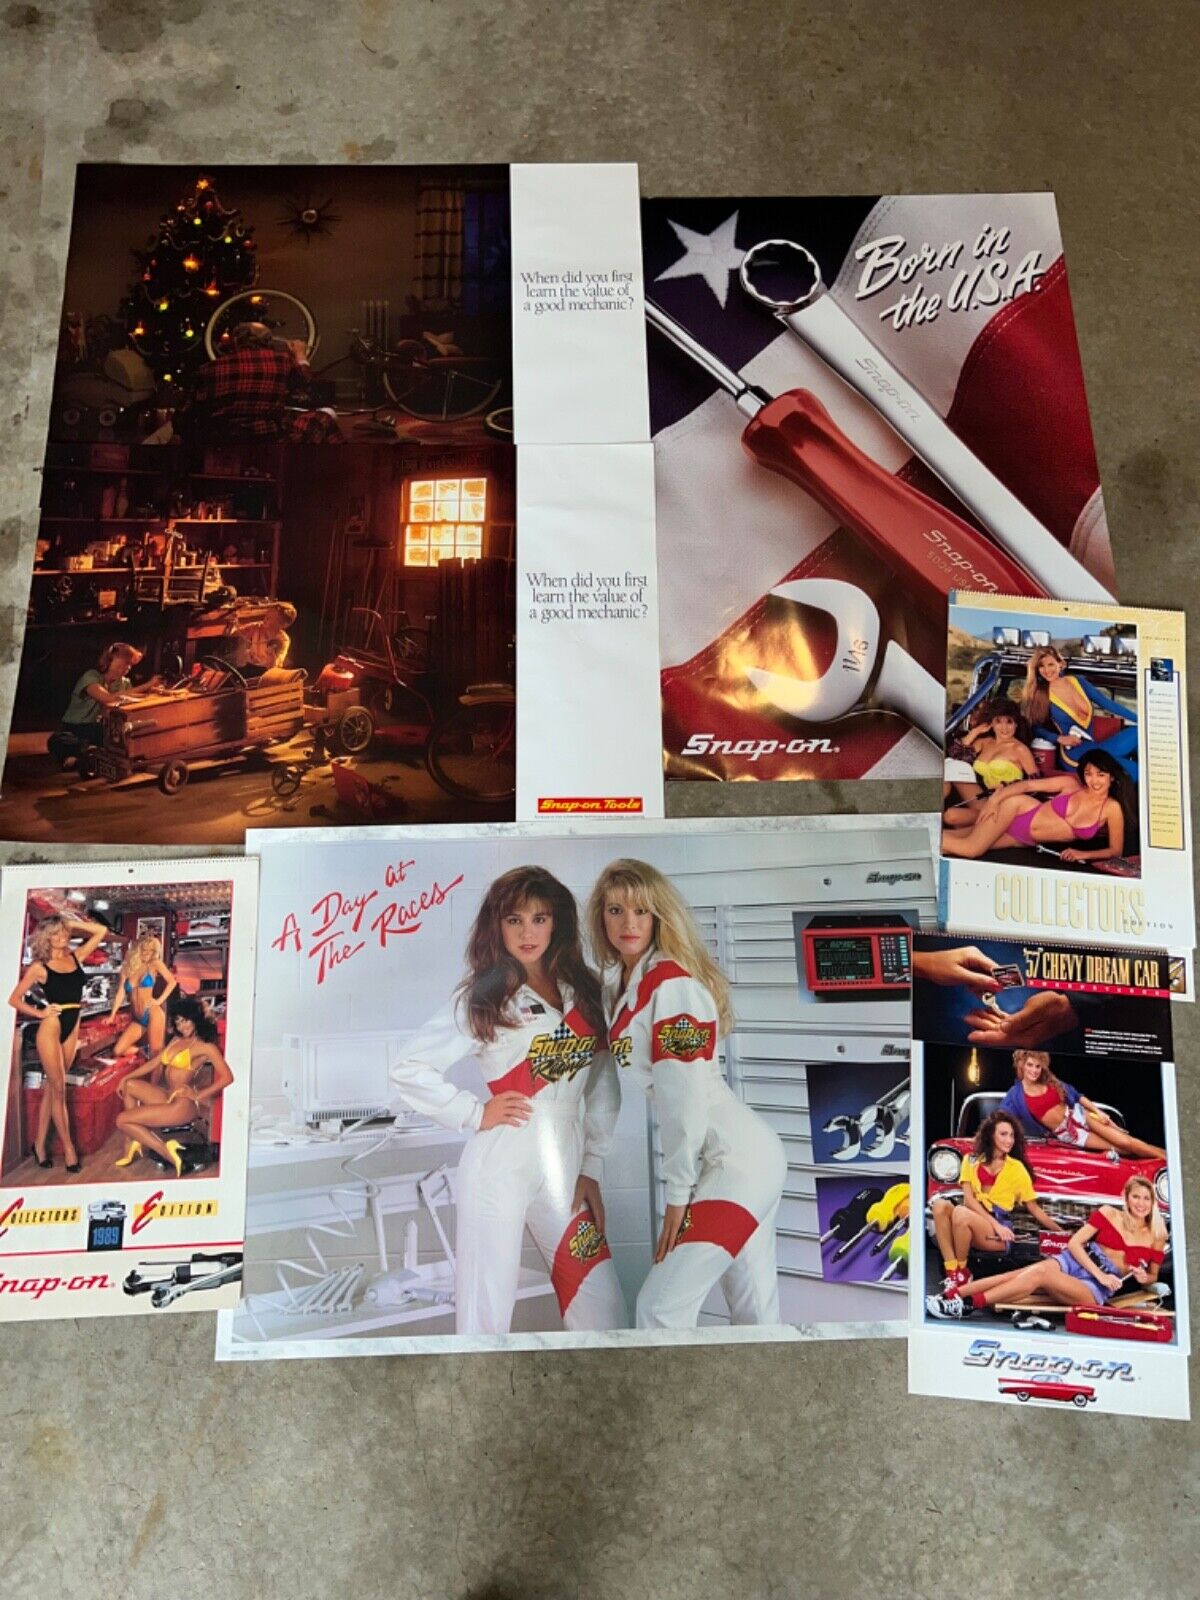 SNAP-ON OFFICIAL GIRL SWIMSUIT PINUP WALL CALENDARS 1989-1992 & 5 PROMO POSTERS